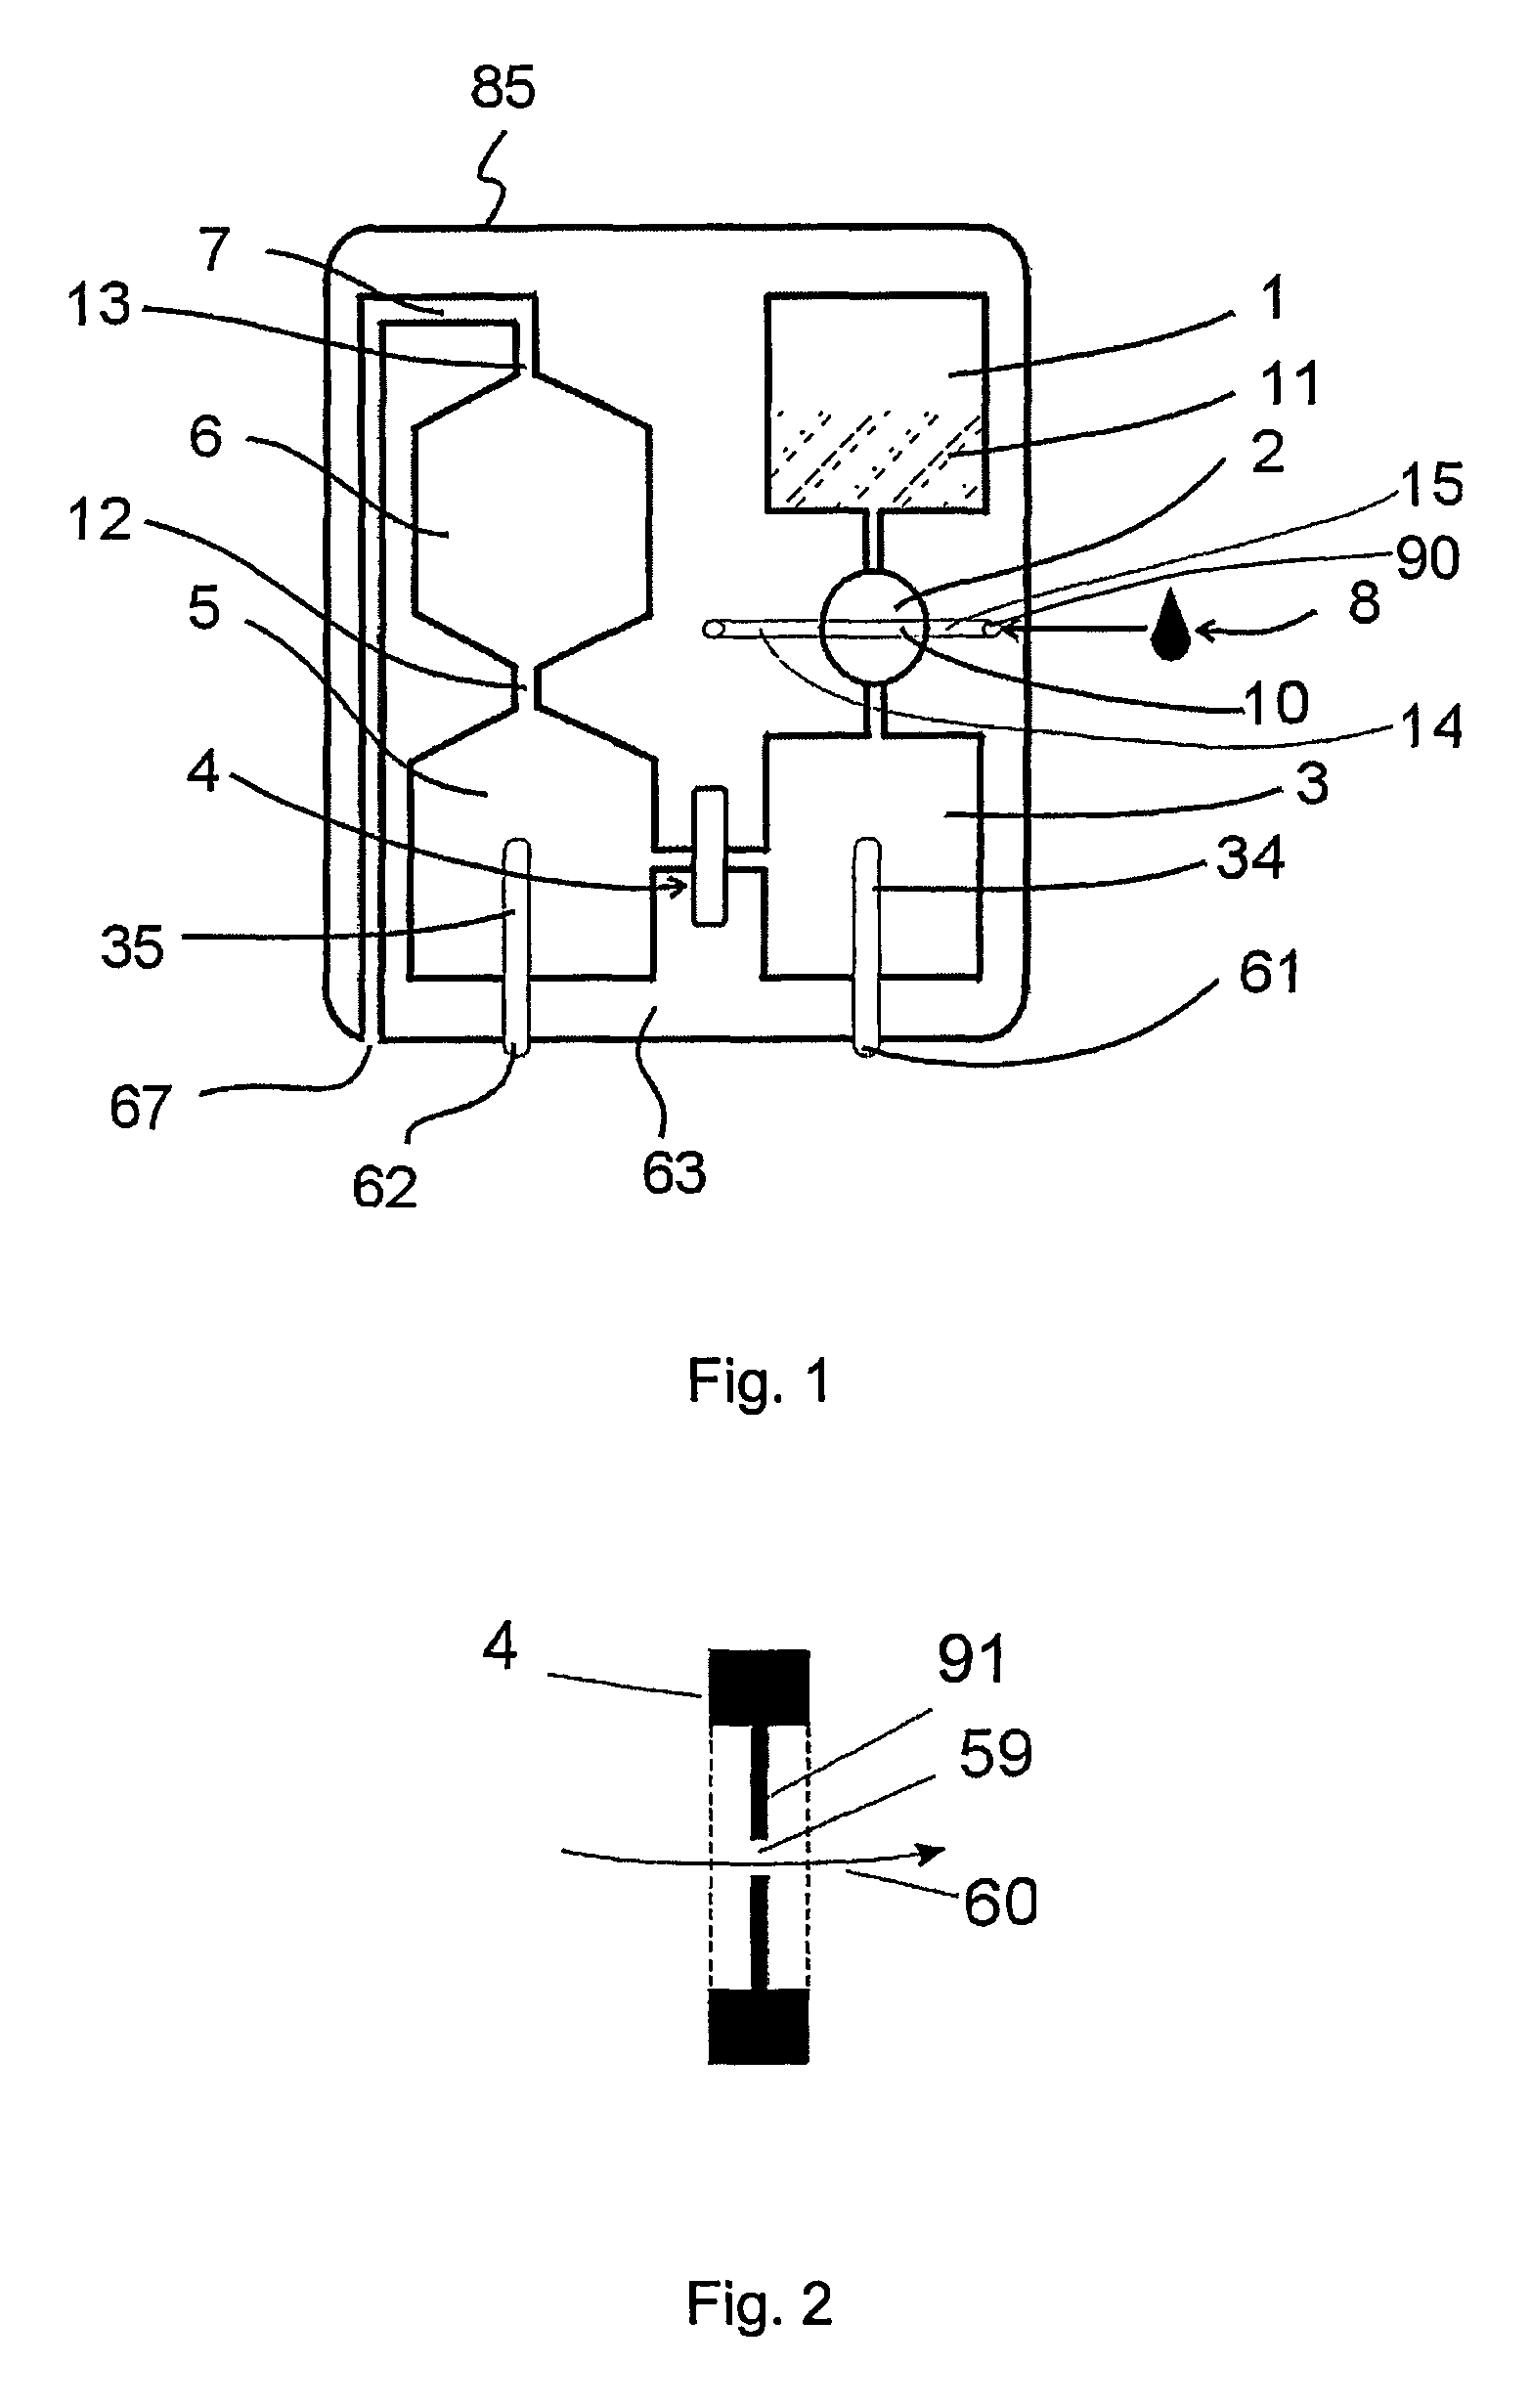 Disposable cartridge for characterizing particles suspended in a liquid